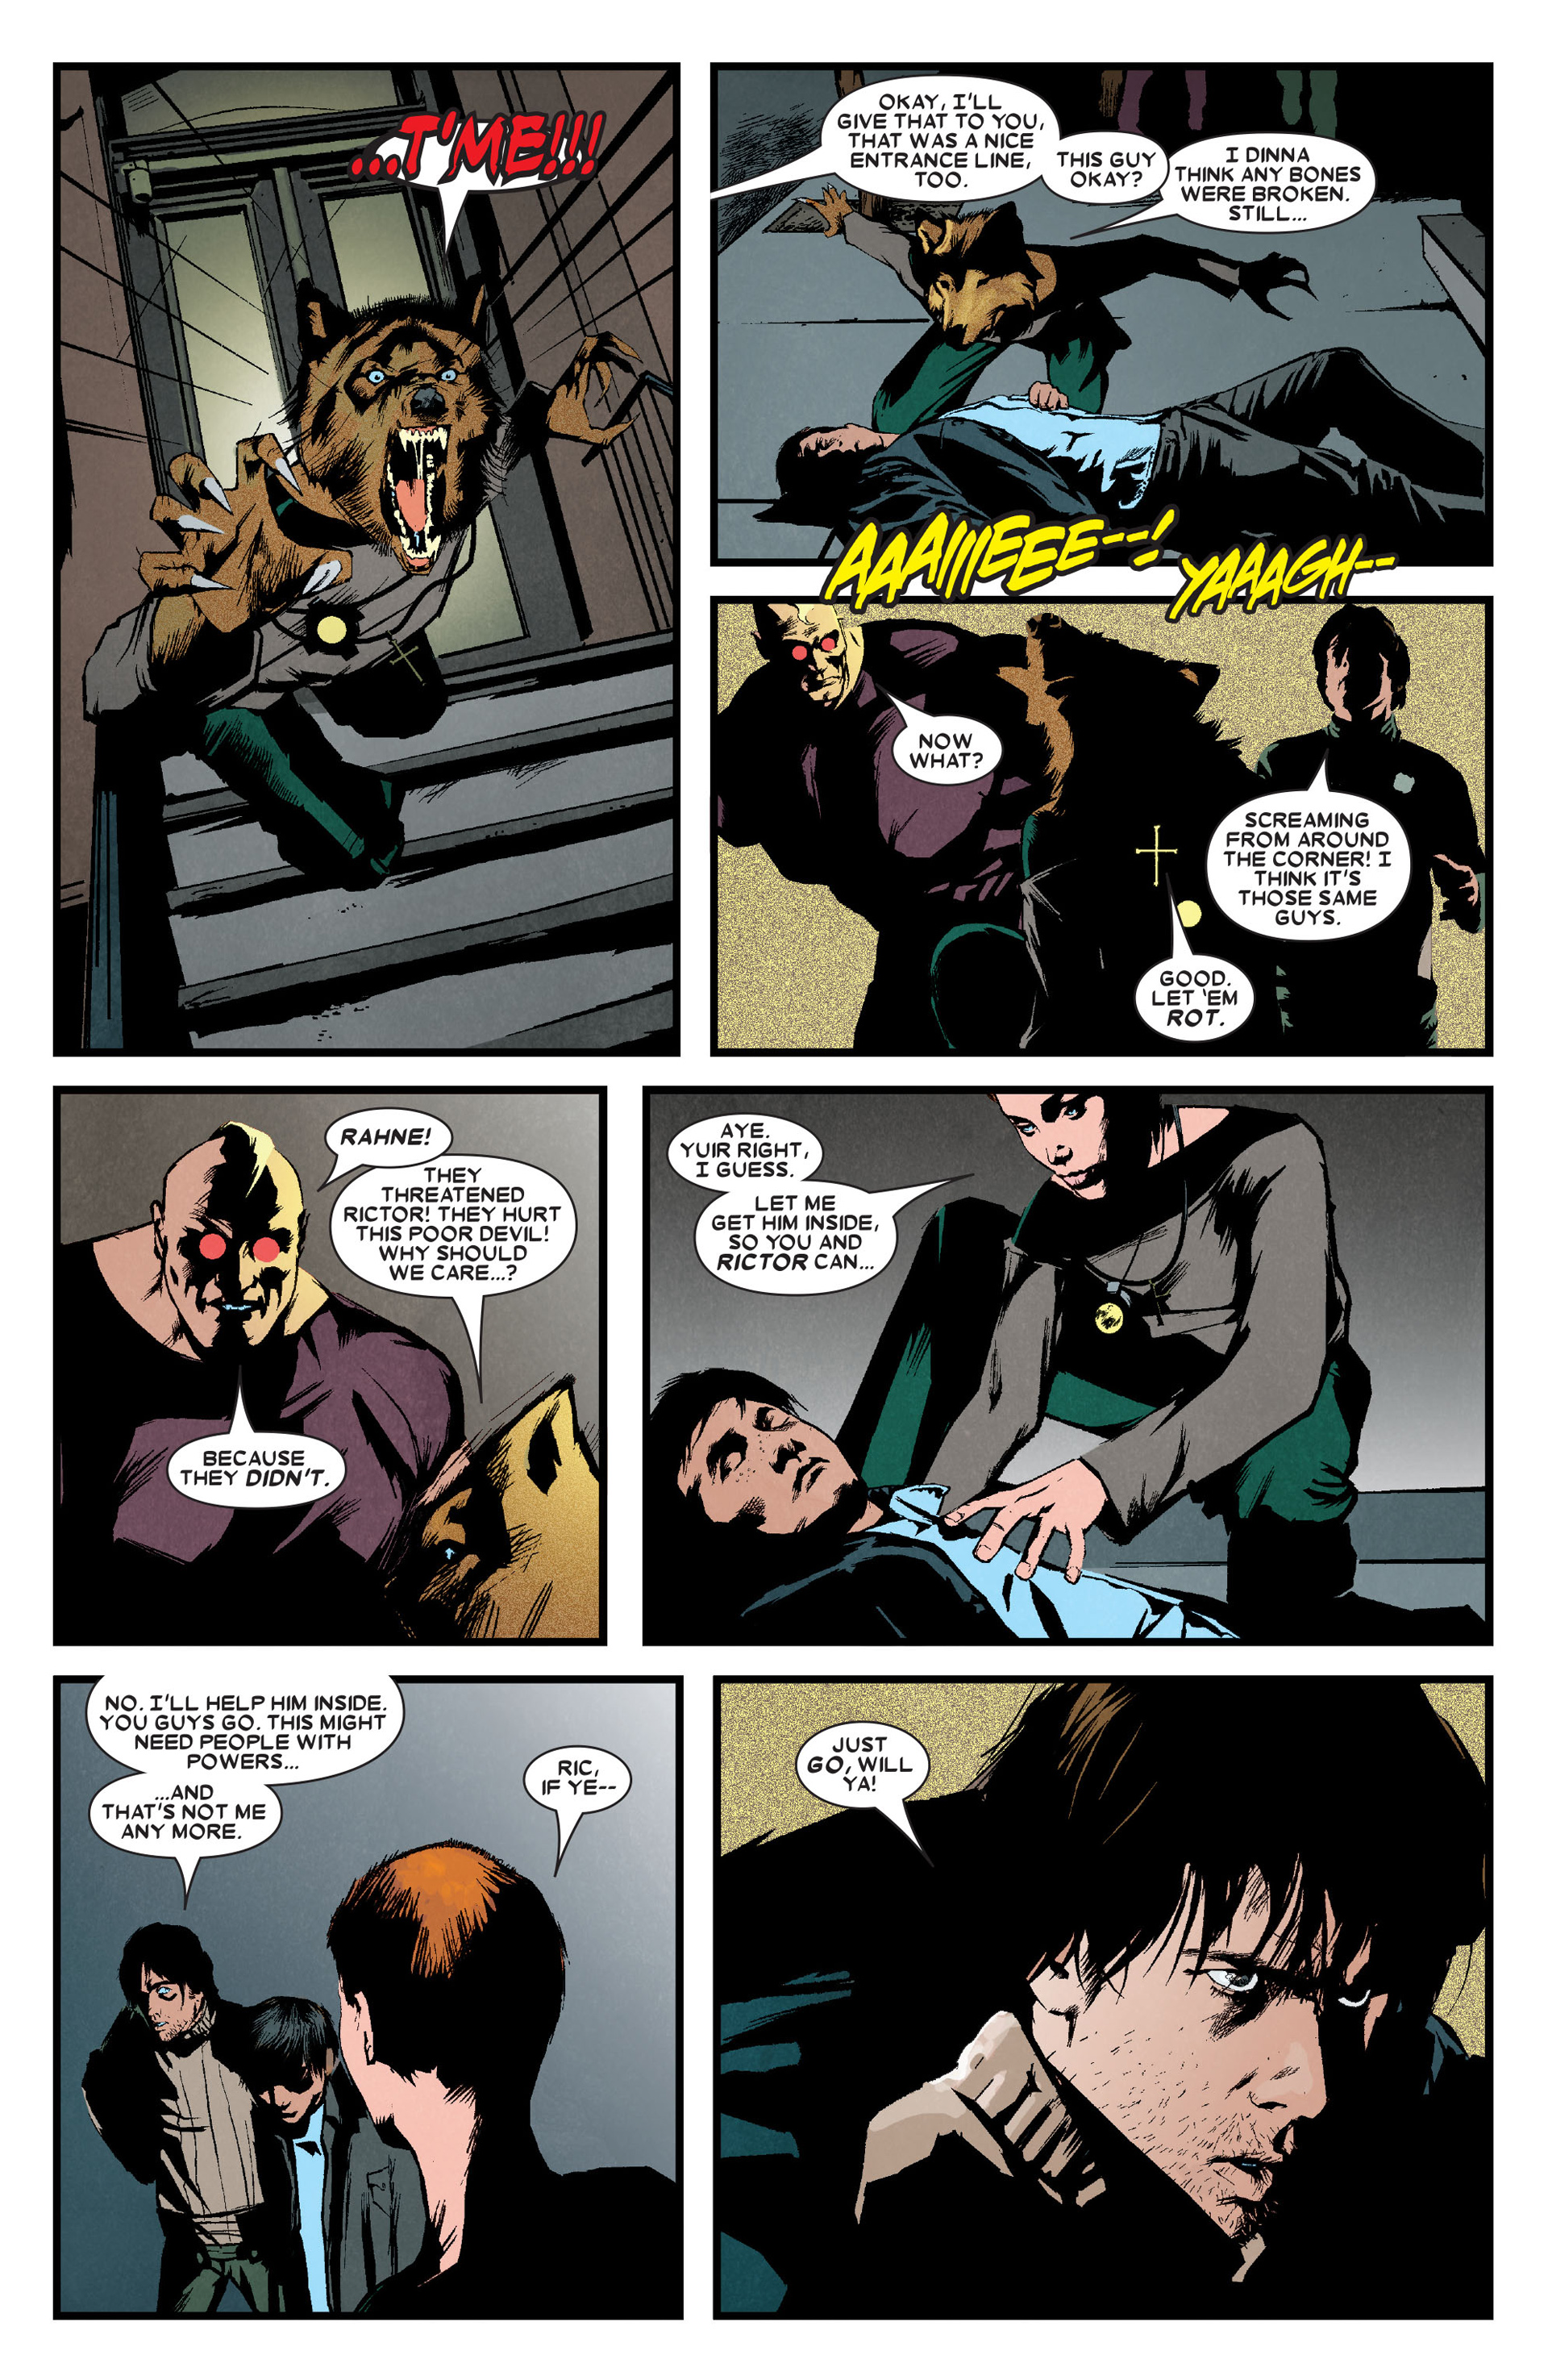 X-Factor (2006) 3 Page 11